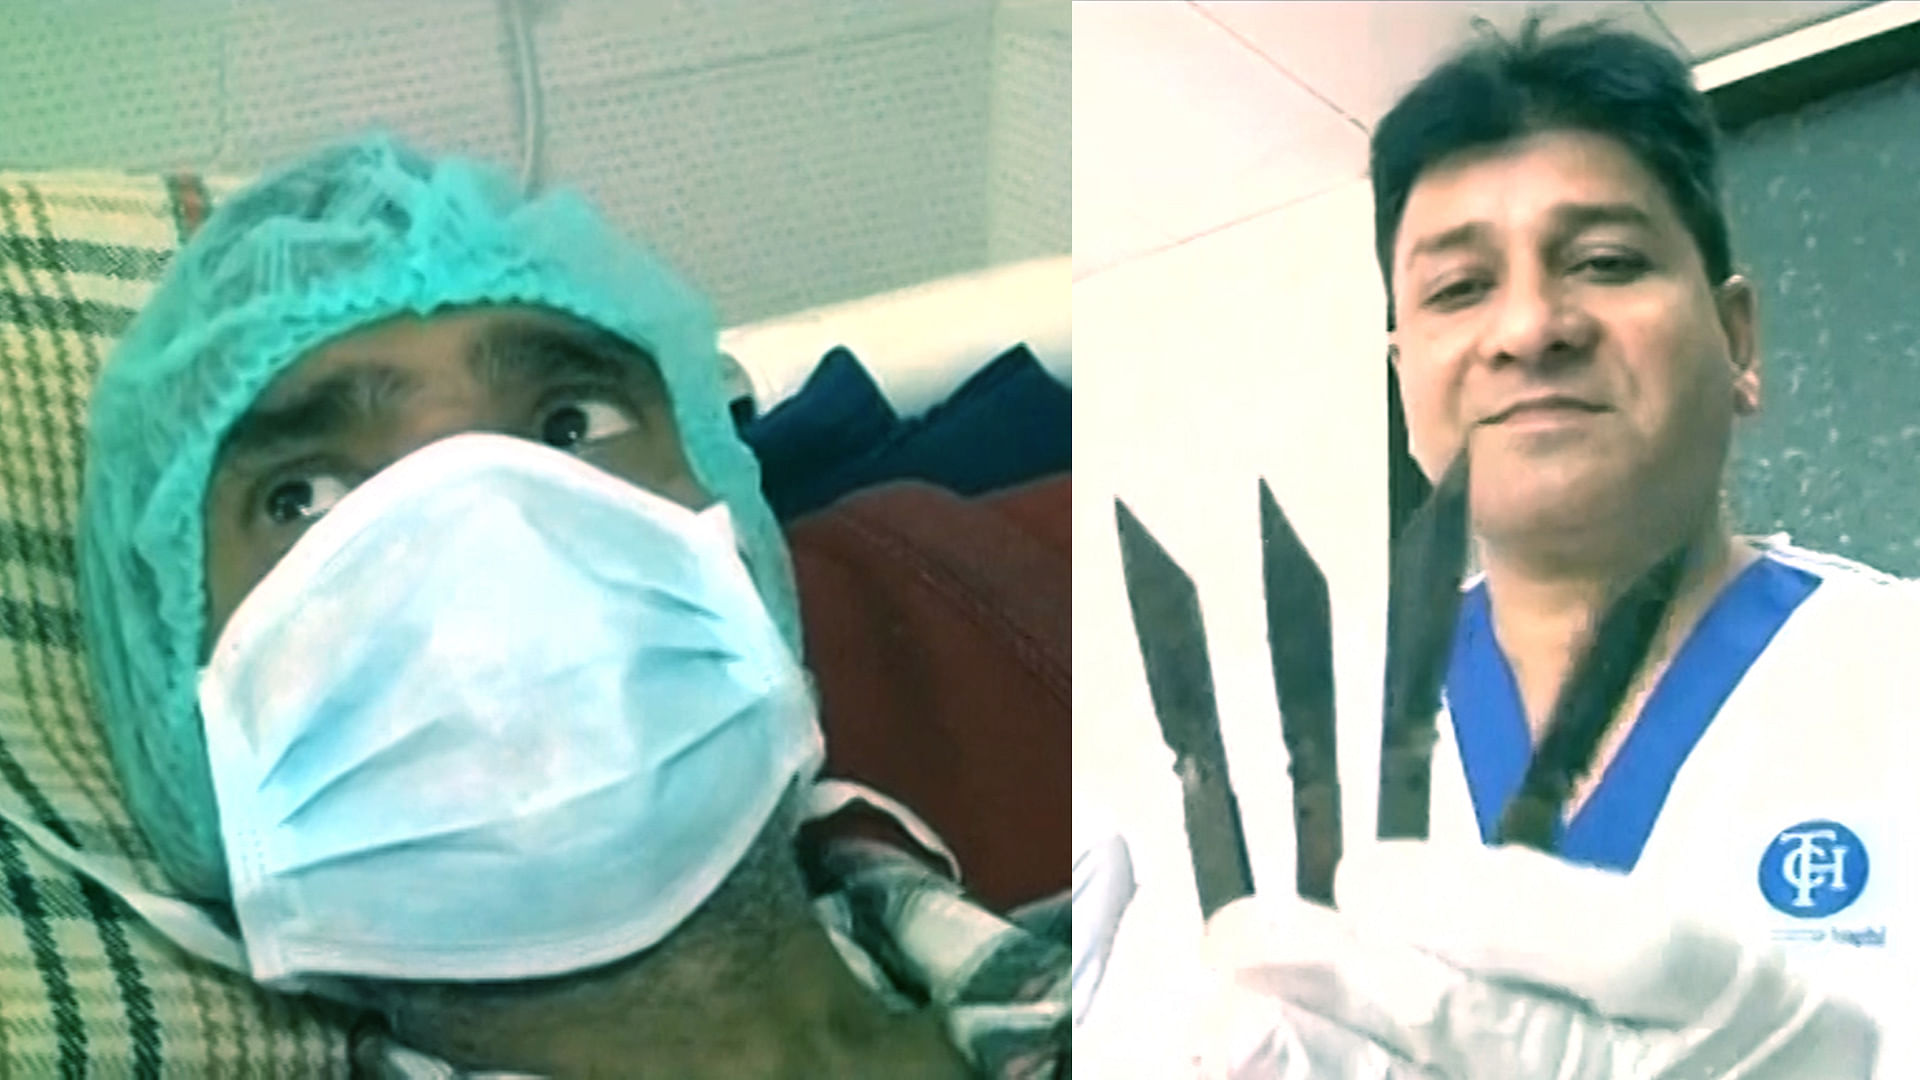 Doctors in Amritsar took out 40 knives from the stomach of Surjeet Singh (left). (Photo: ANI, altered by <b>The Quint</b>)